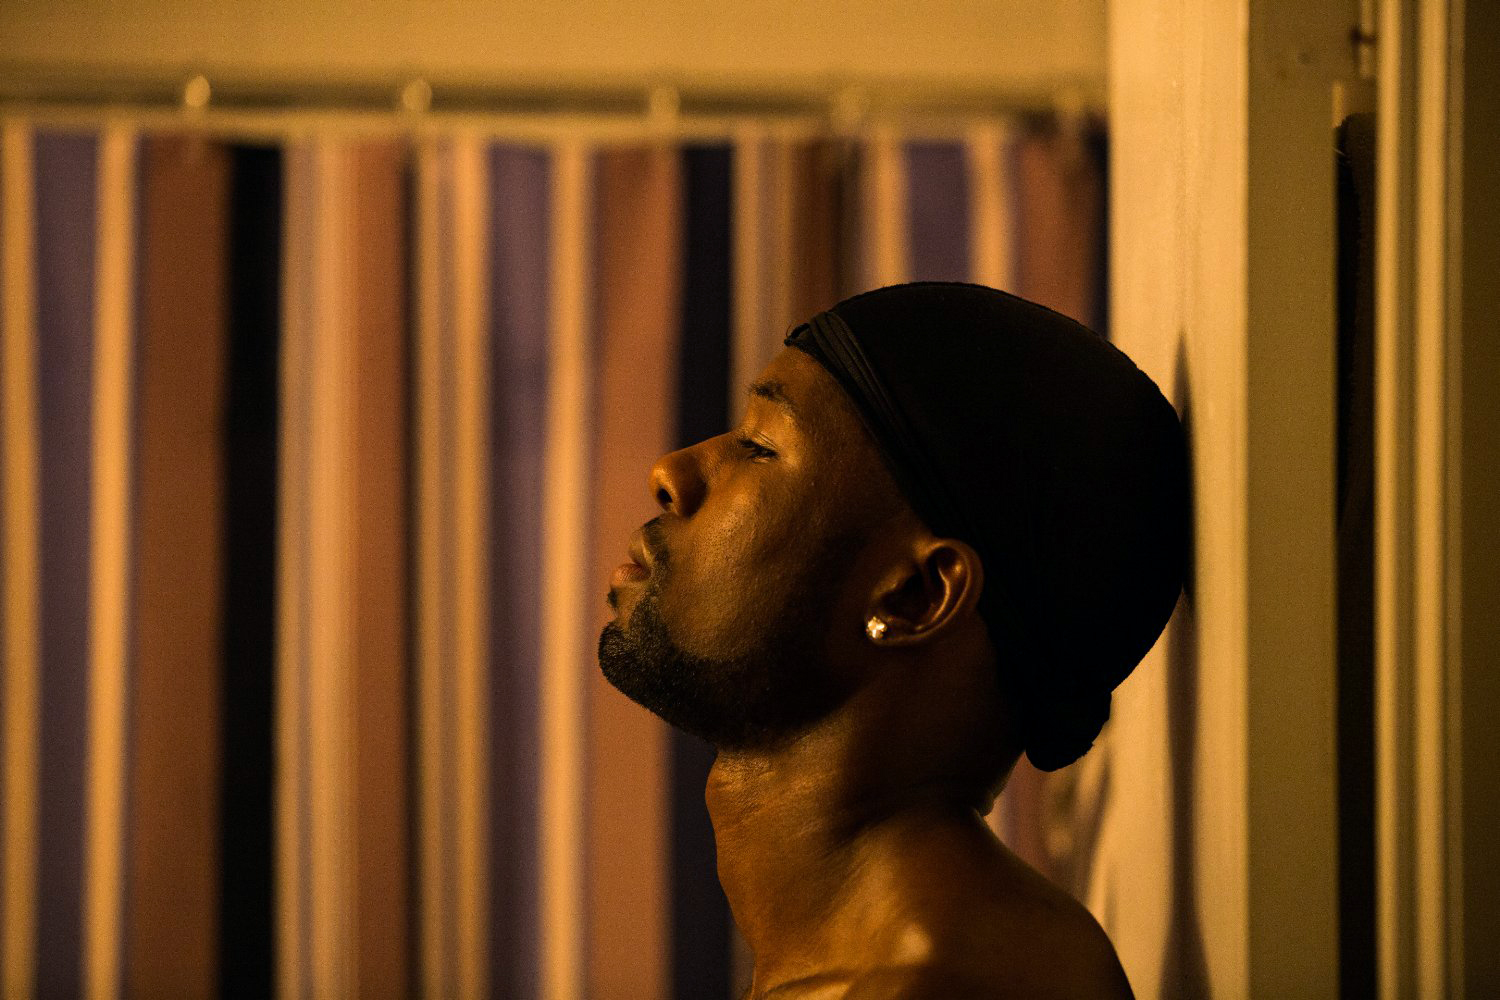 How 'Moonlight' became the little film that could and made it to